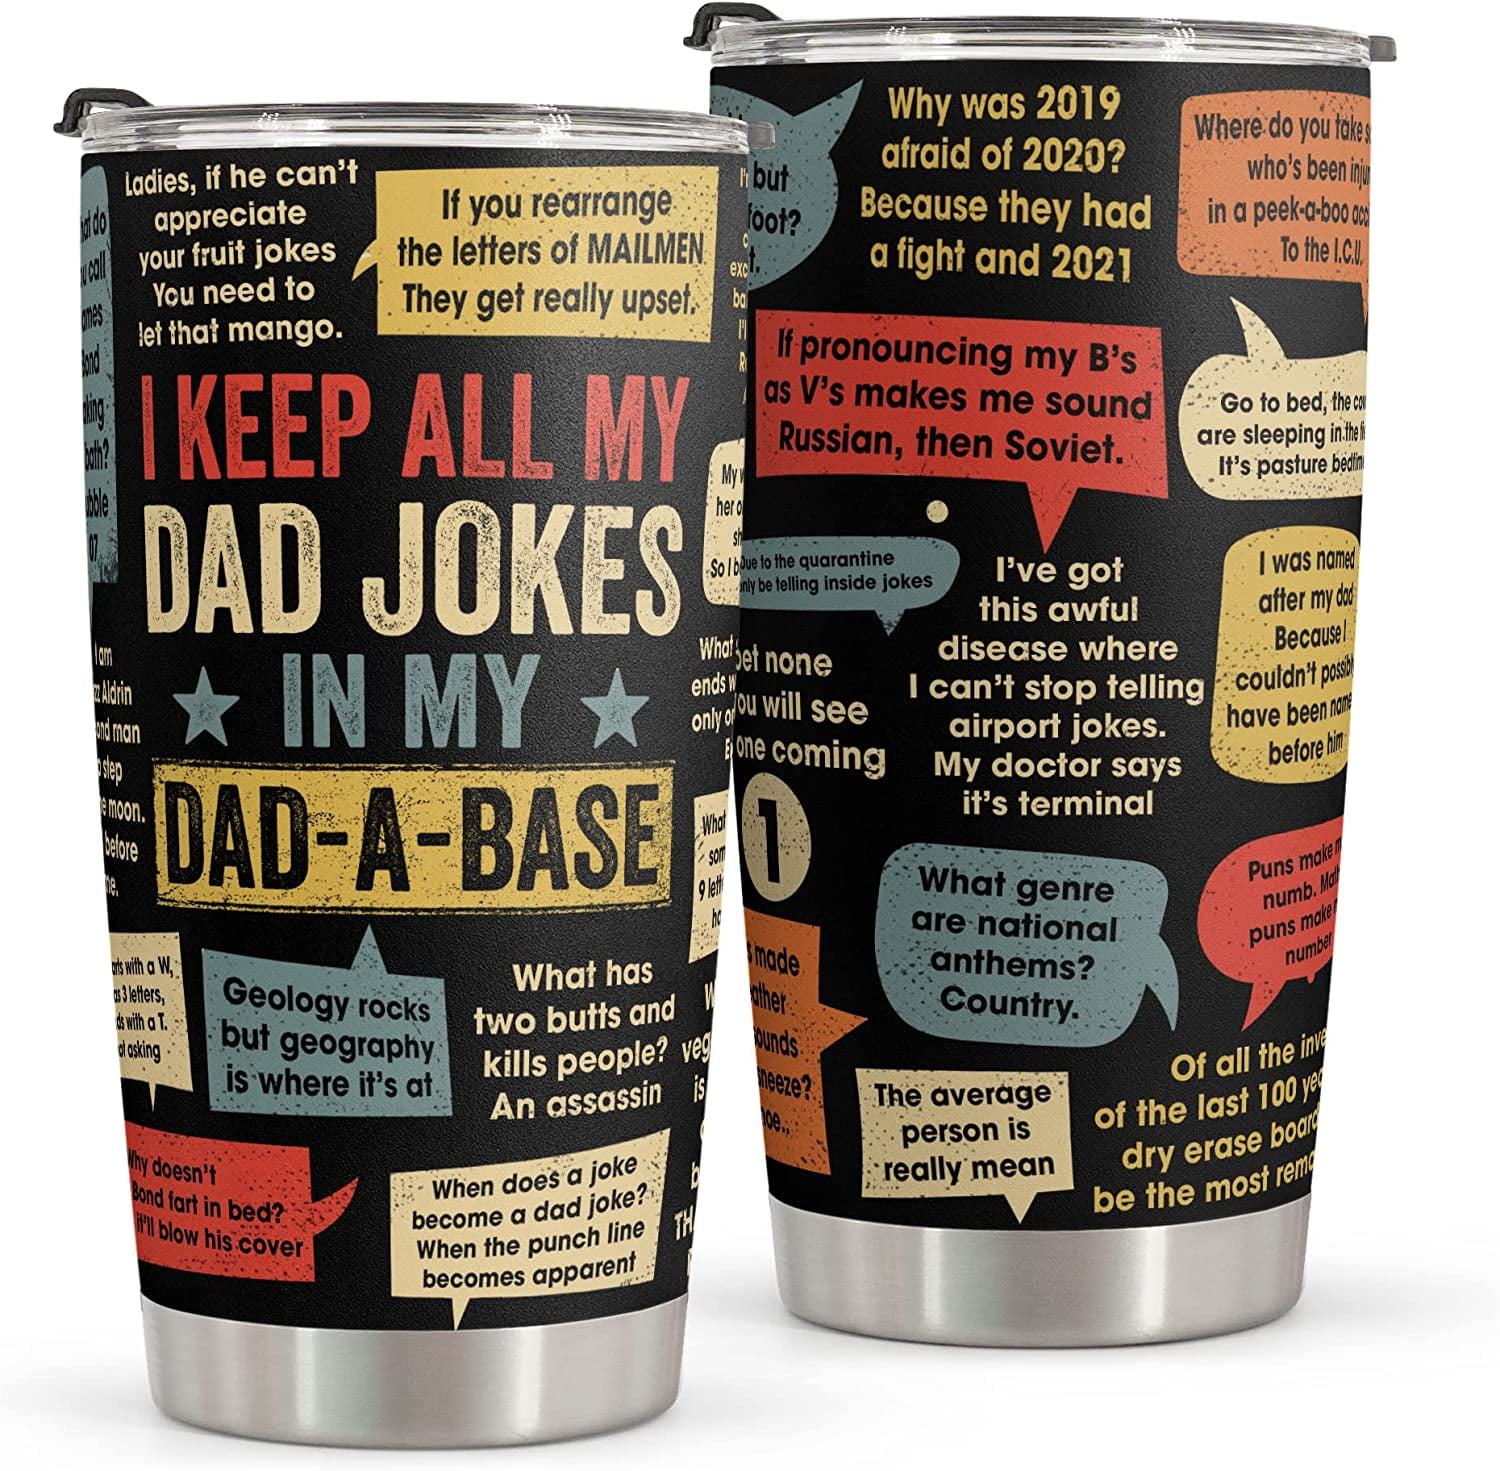 64HYDRO 20oz Birthday Gifts for Men, Dad, Son, Husband, Gifts for Him,  Coffee Thermos for Men, Cool …See more 64HYDRO 20oz Birthday Gifts for Men